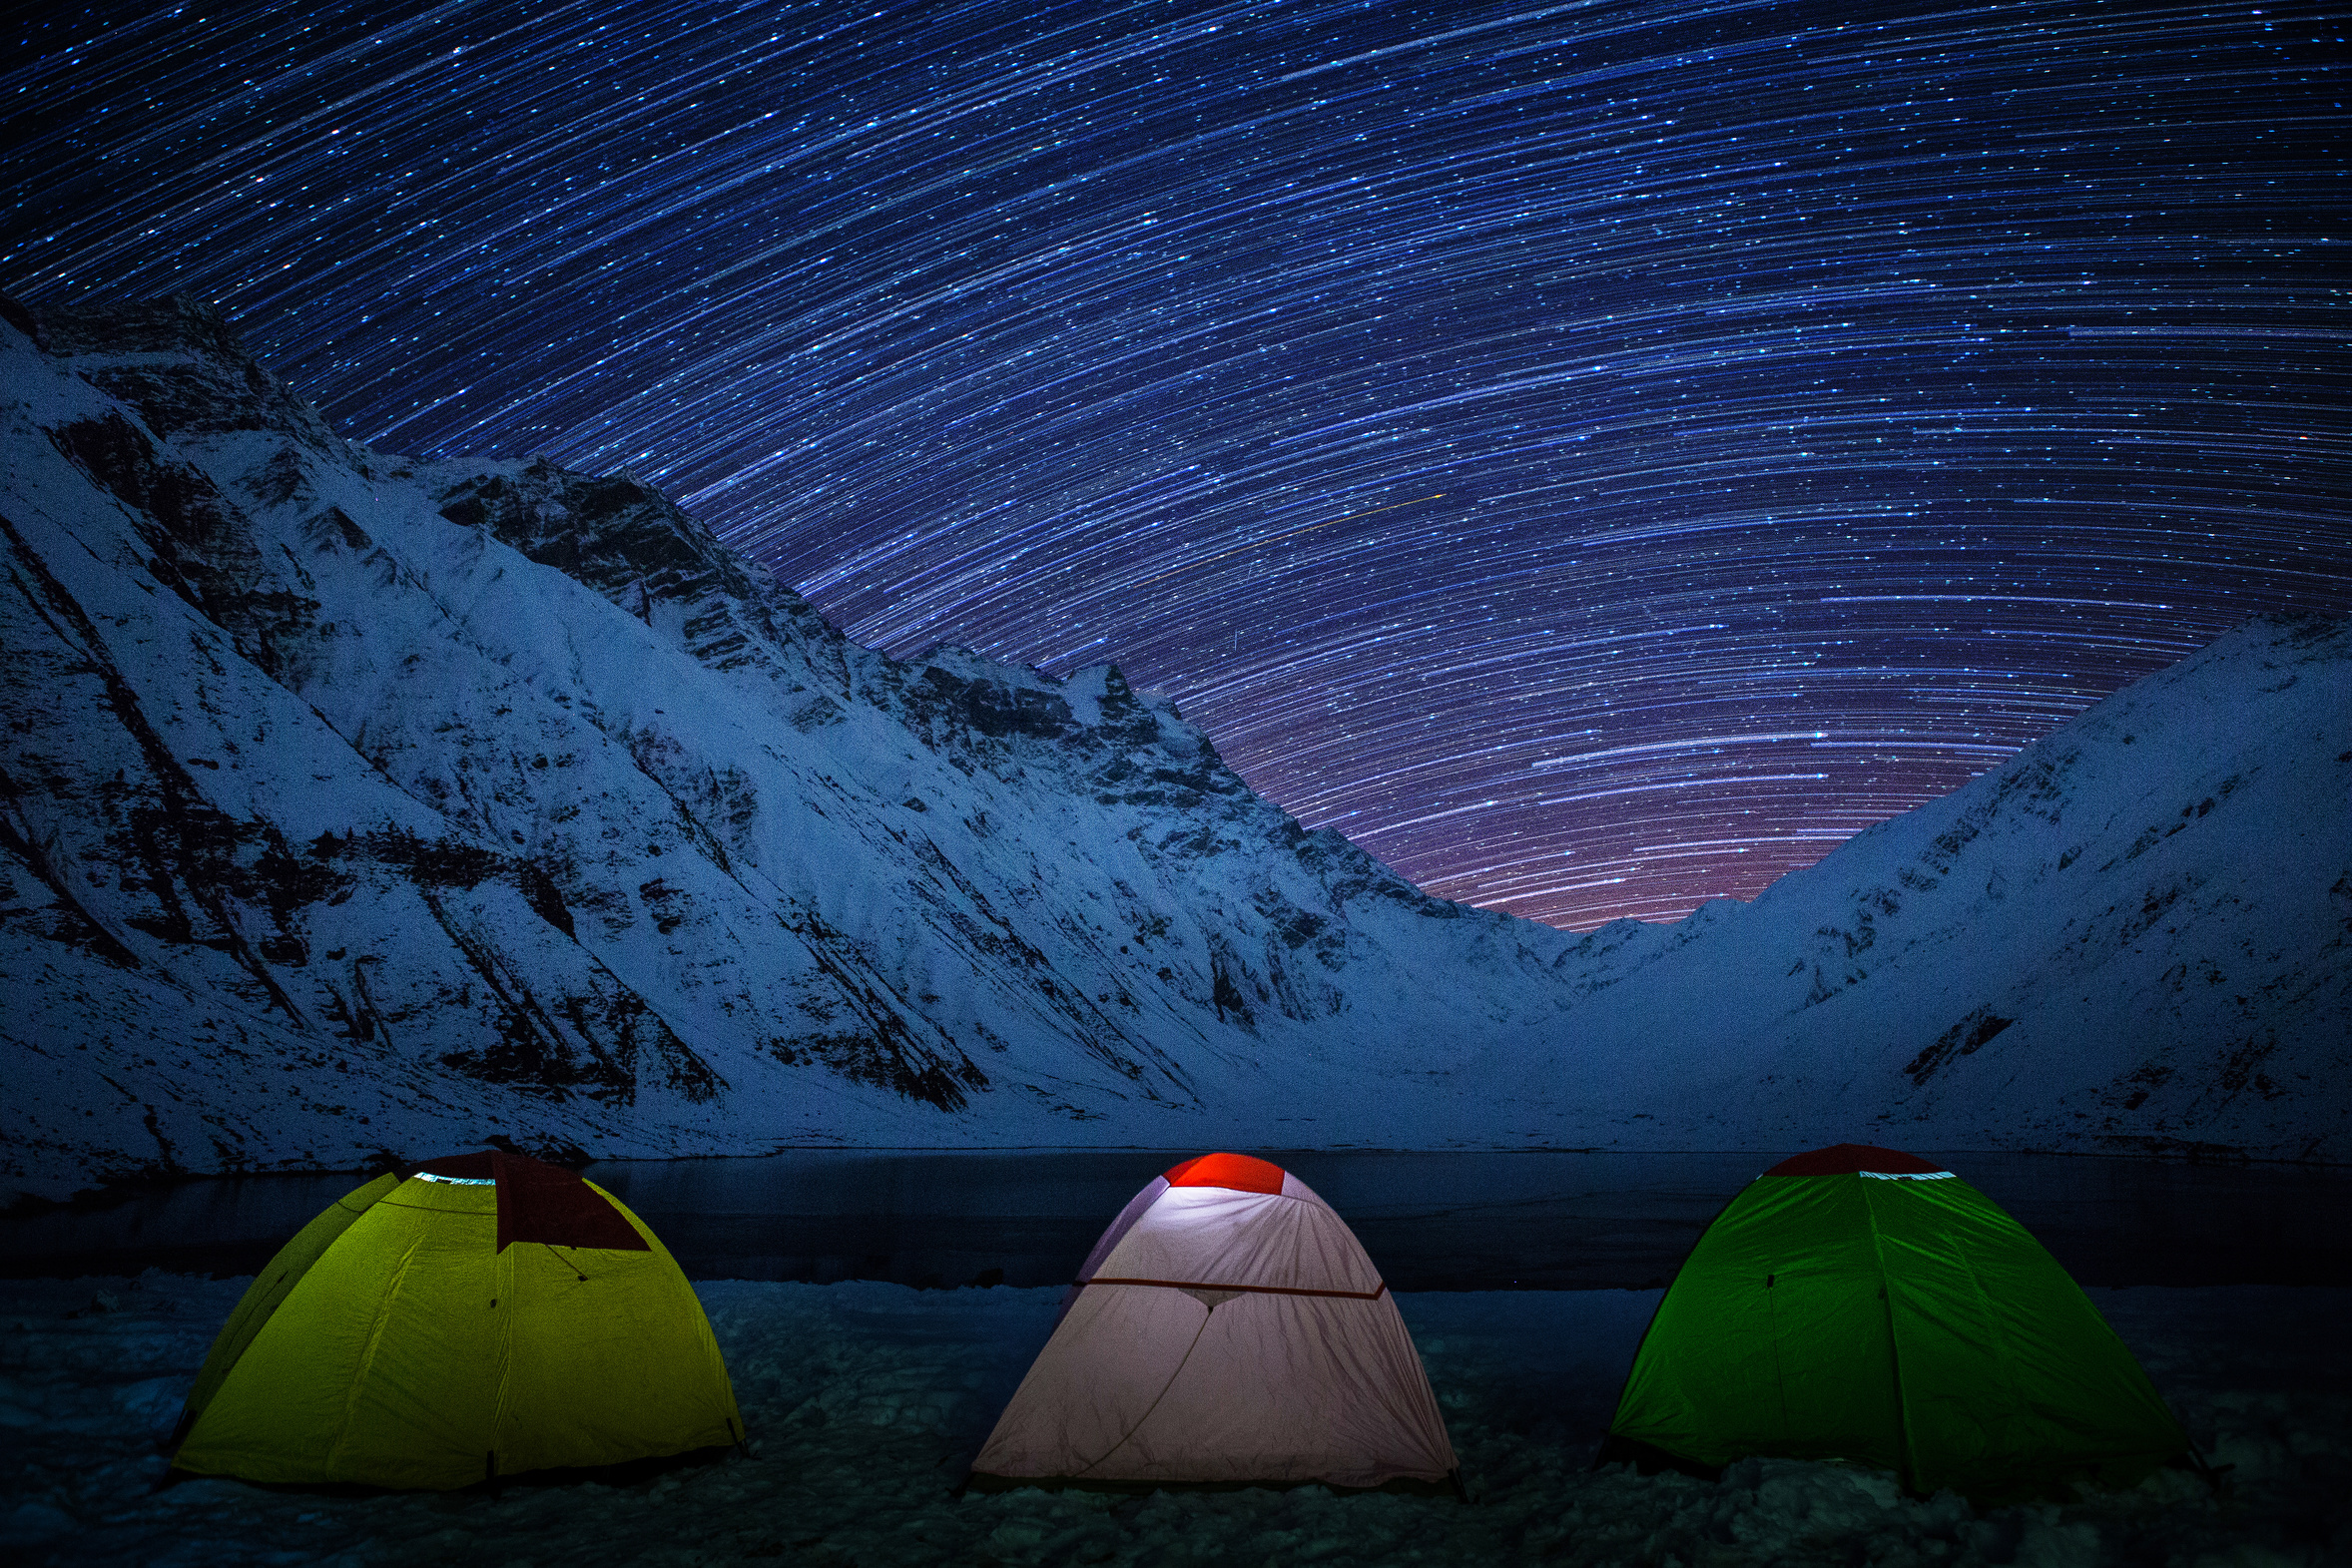 Tents at the shore of Lake Saiful Muluk and star trails in the sky in Pakistan.